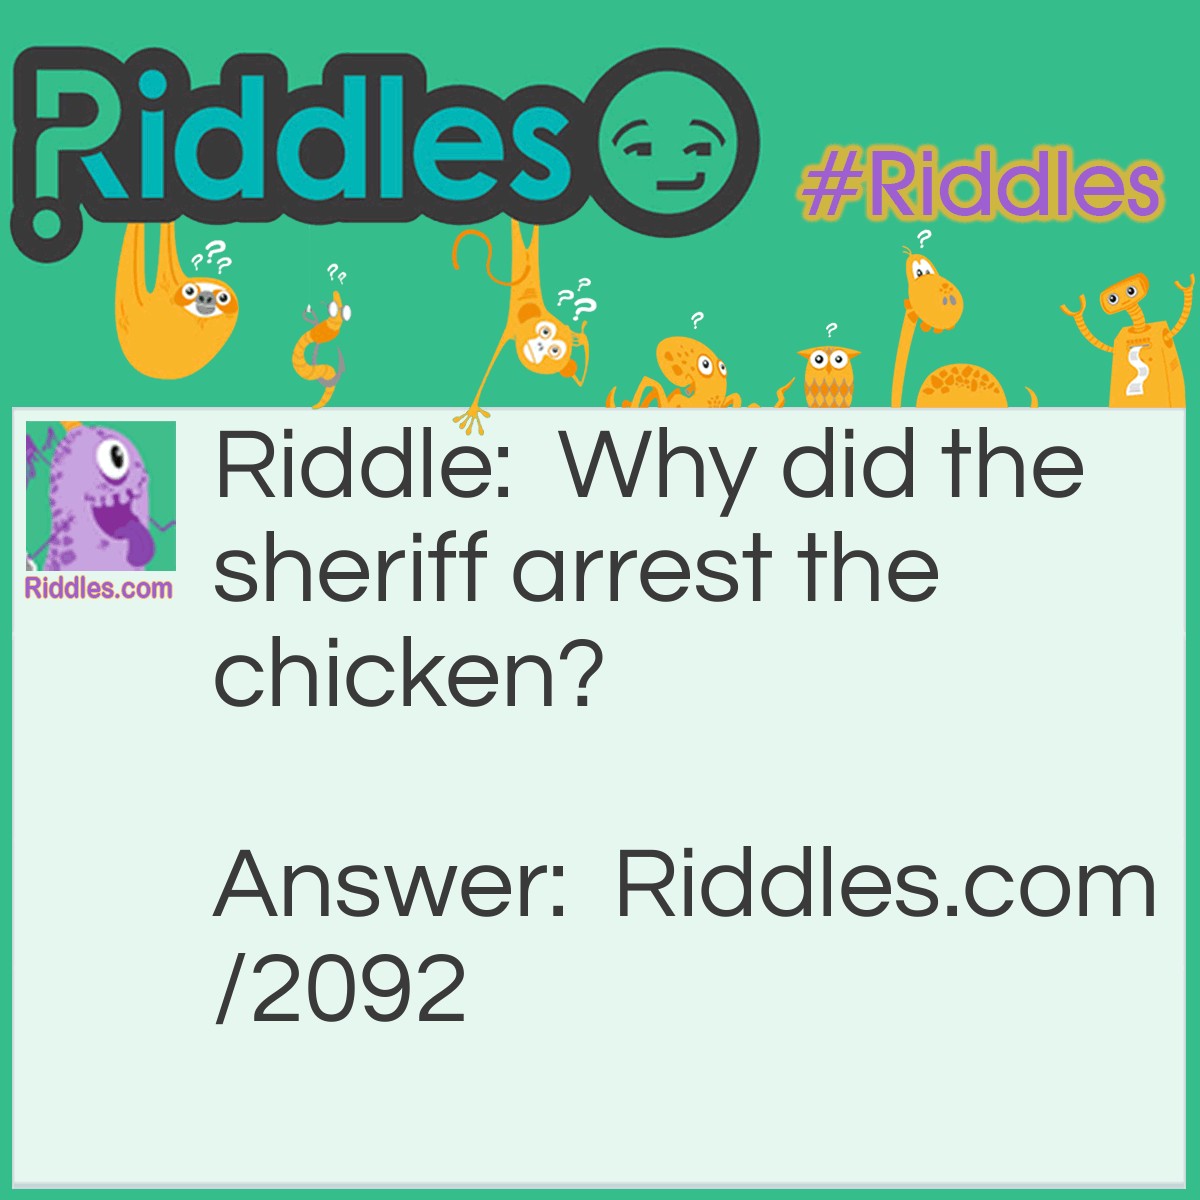 Riddle: Why did the sheriff arrest the chicken? Answer: It used fowl language